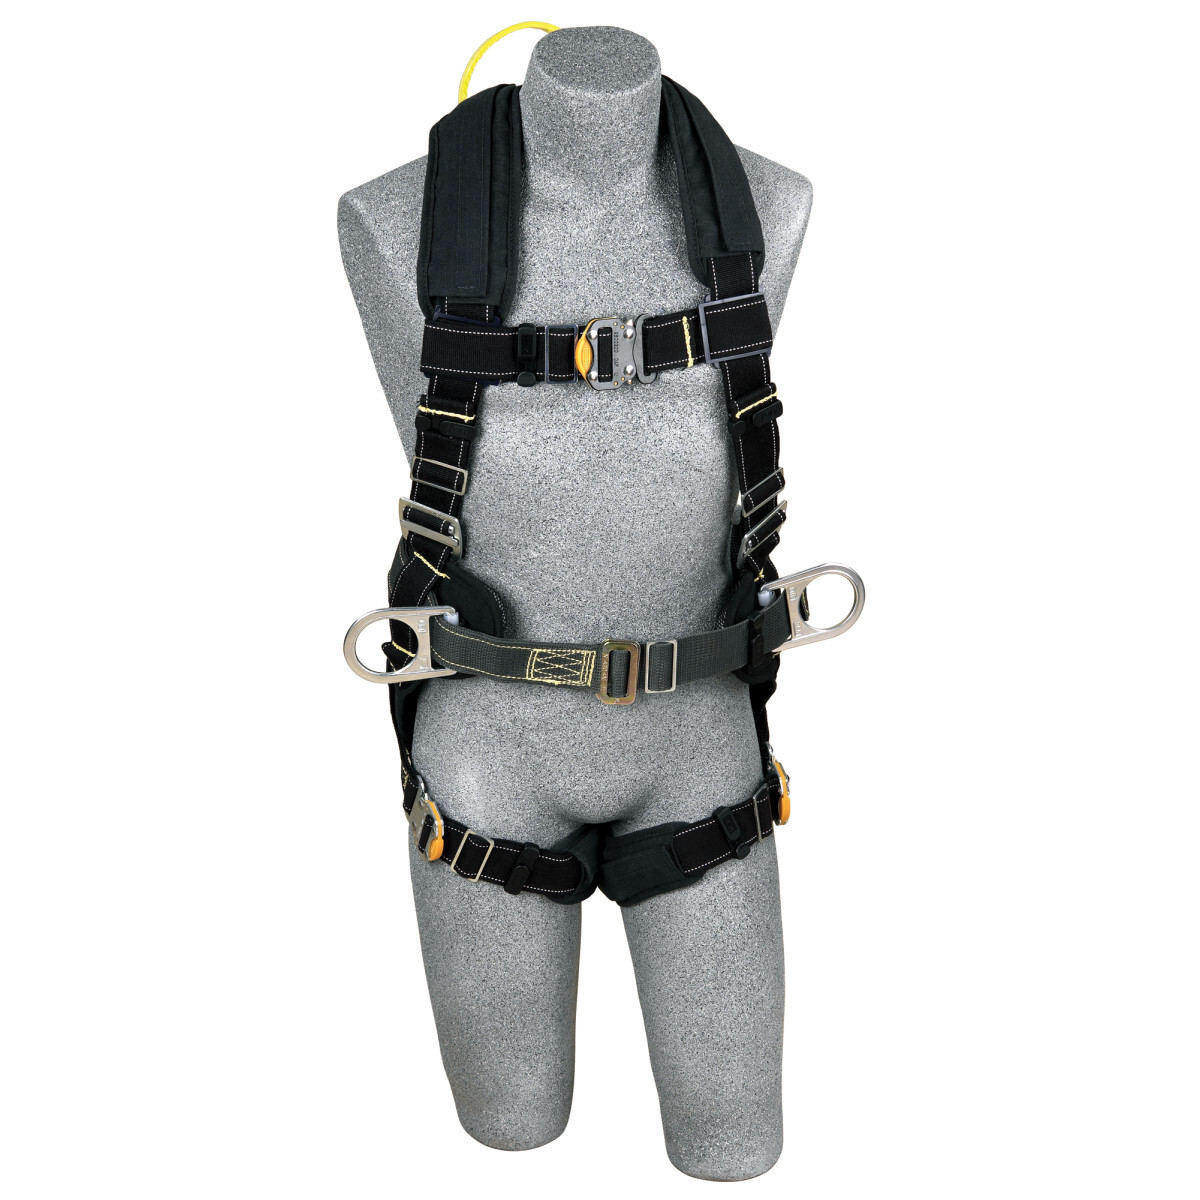 3M™ DBI-SALA® Small ExoFit™ XP Arc Flash Flame Resistant Construction Style Harness With Side D-Ring, Quick Connect Buckle Leg S